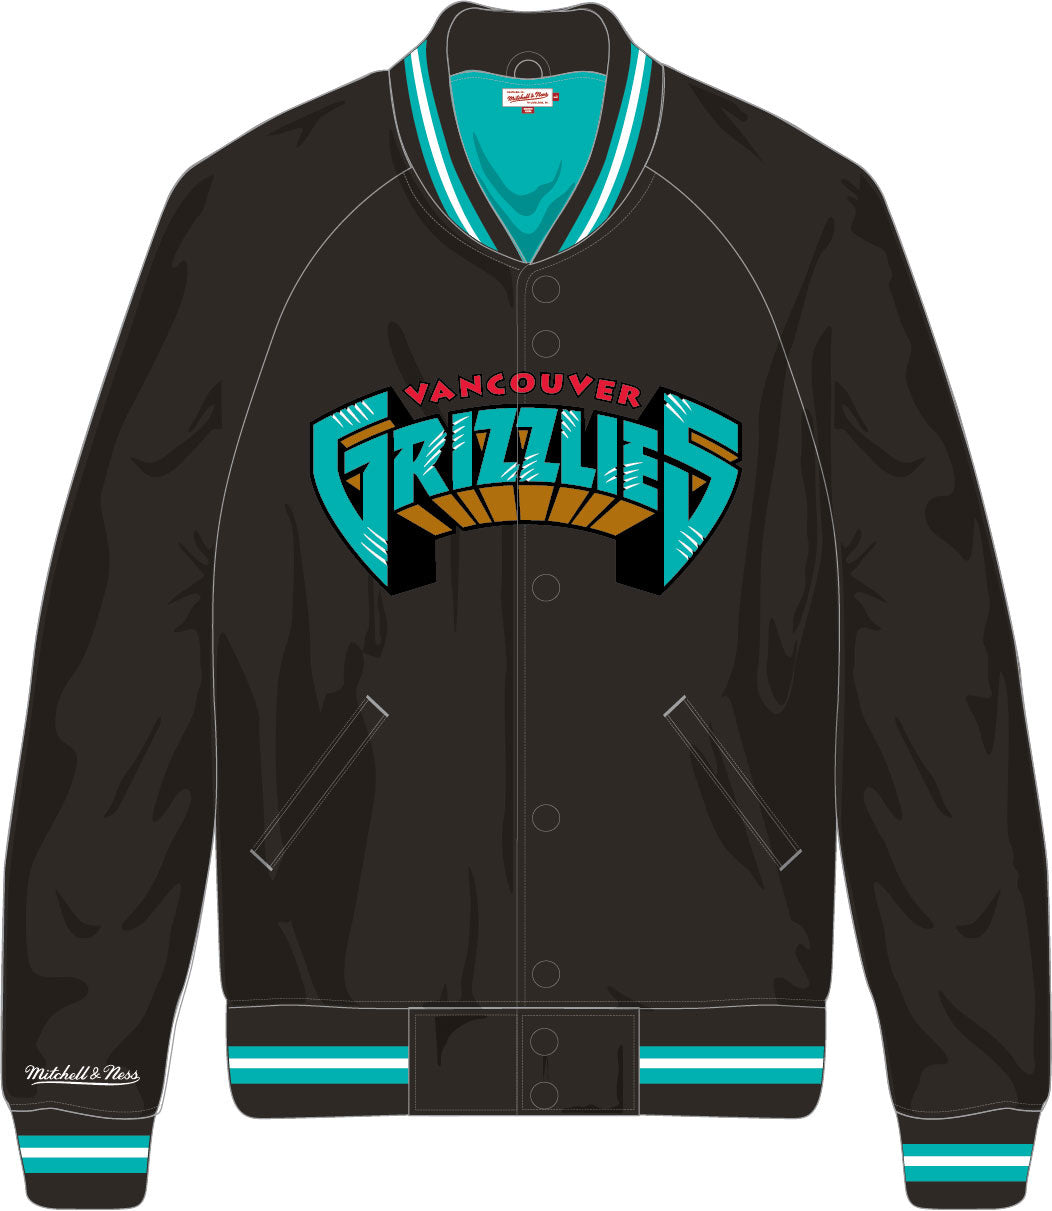 Mitchell and Ness- Vancouver Grizzlies Lightweight Satin Kids Jacket